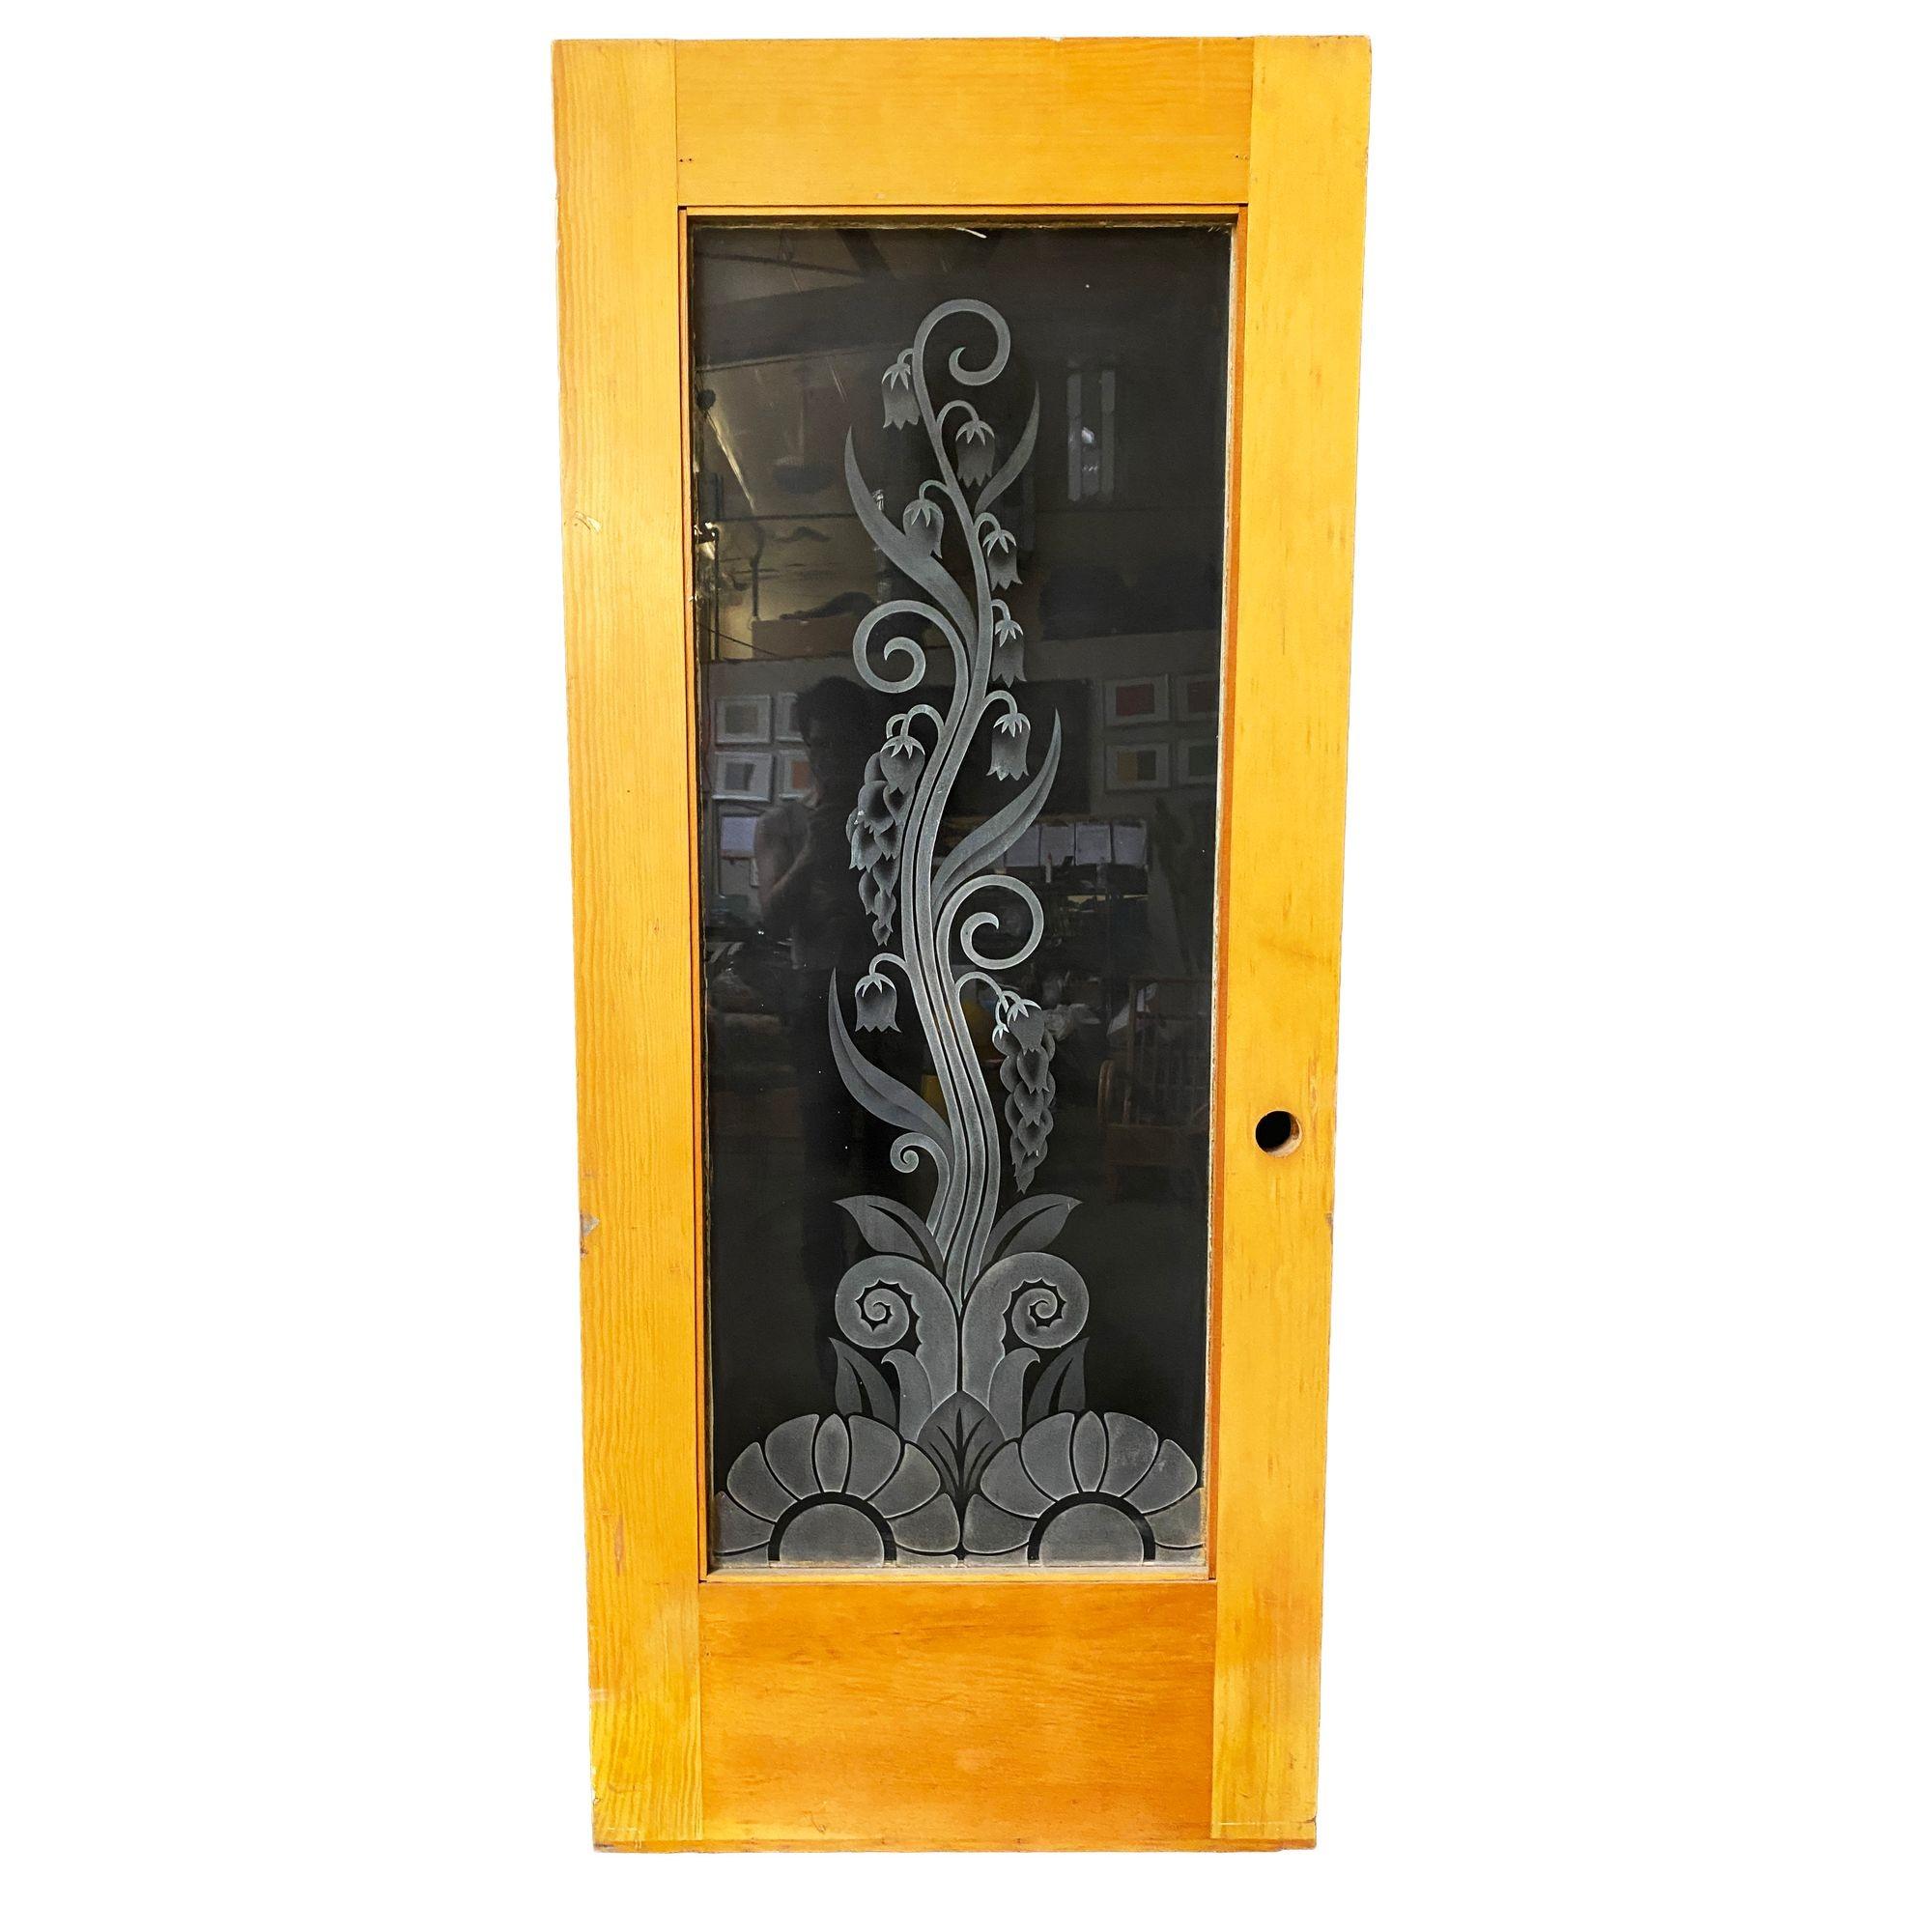 Custom-made hand etched/cut art glass door, featuring an organic vine pattern coming out of a geometric floral at the bottom. The custom glass pane is fixed to an oak door frame. 
 
This door was custom made in the early 1920 and was accurate by